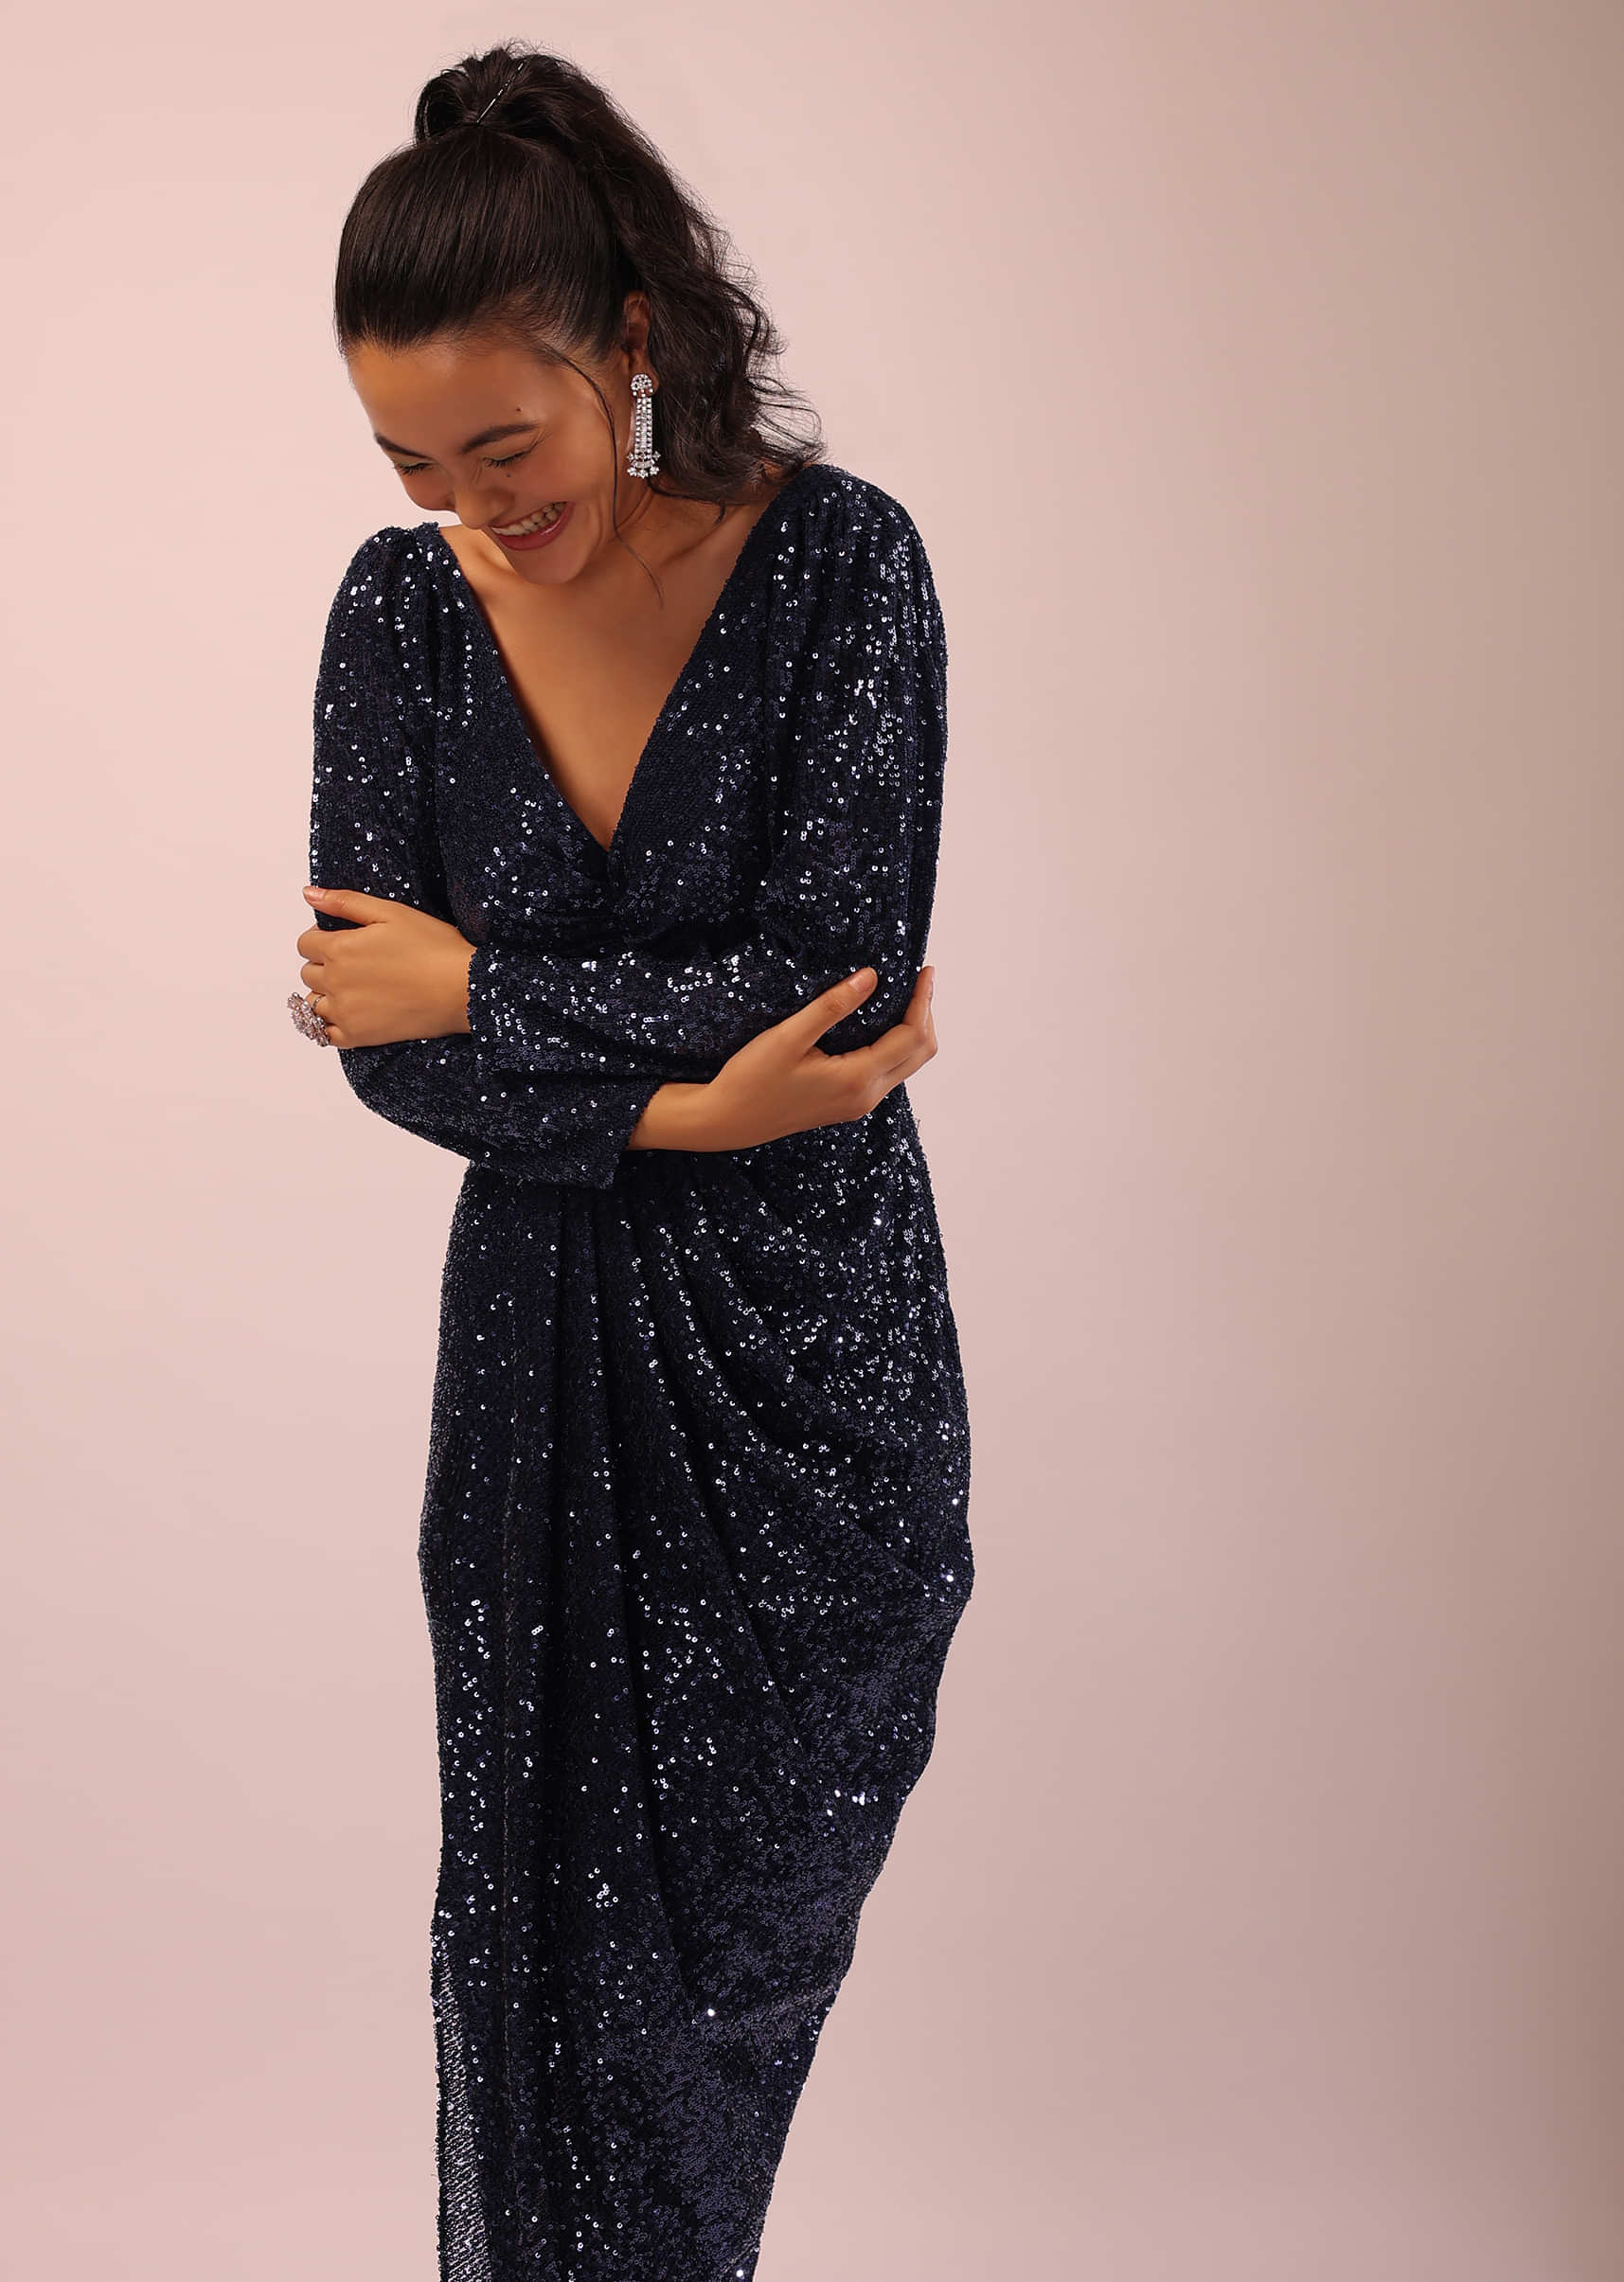 Midnight Blue Gown Embellished In Sequins, With Cowl Drape And Puffed Shoulder Sleeves